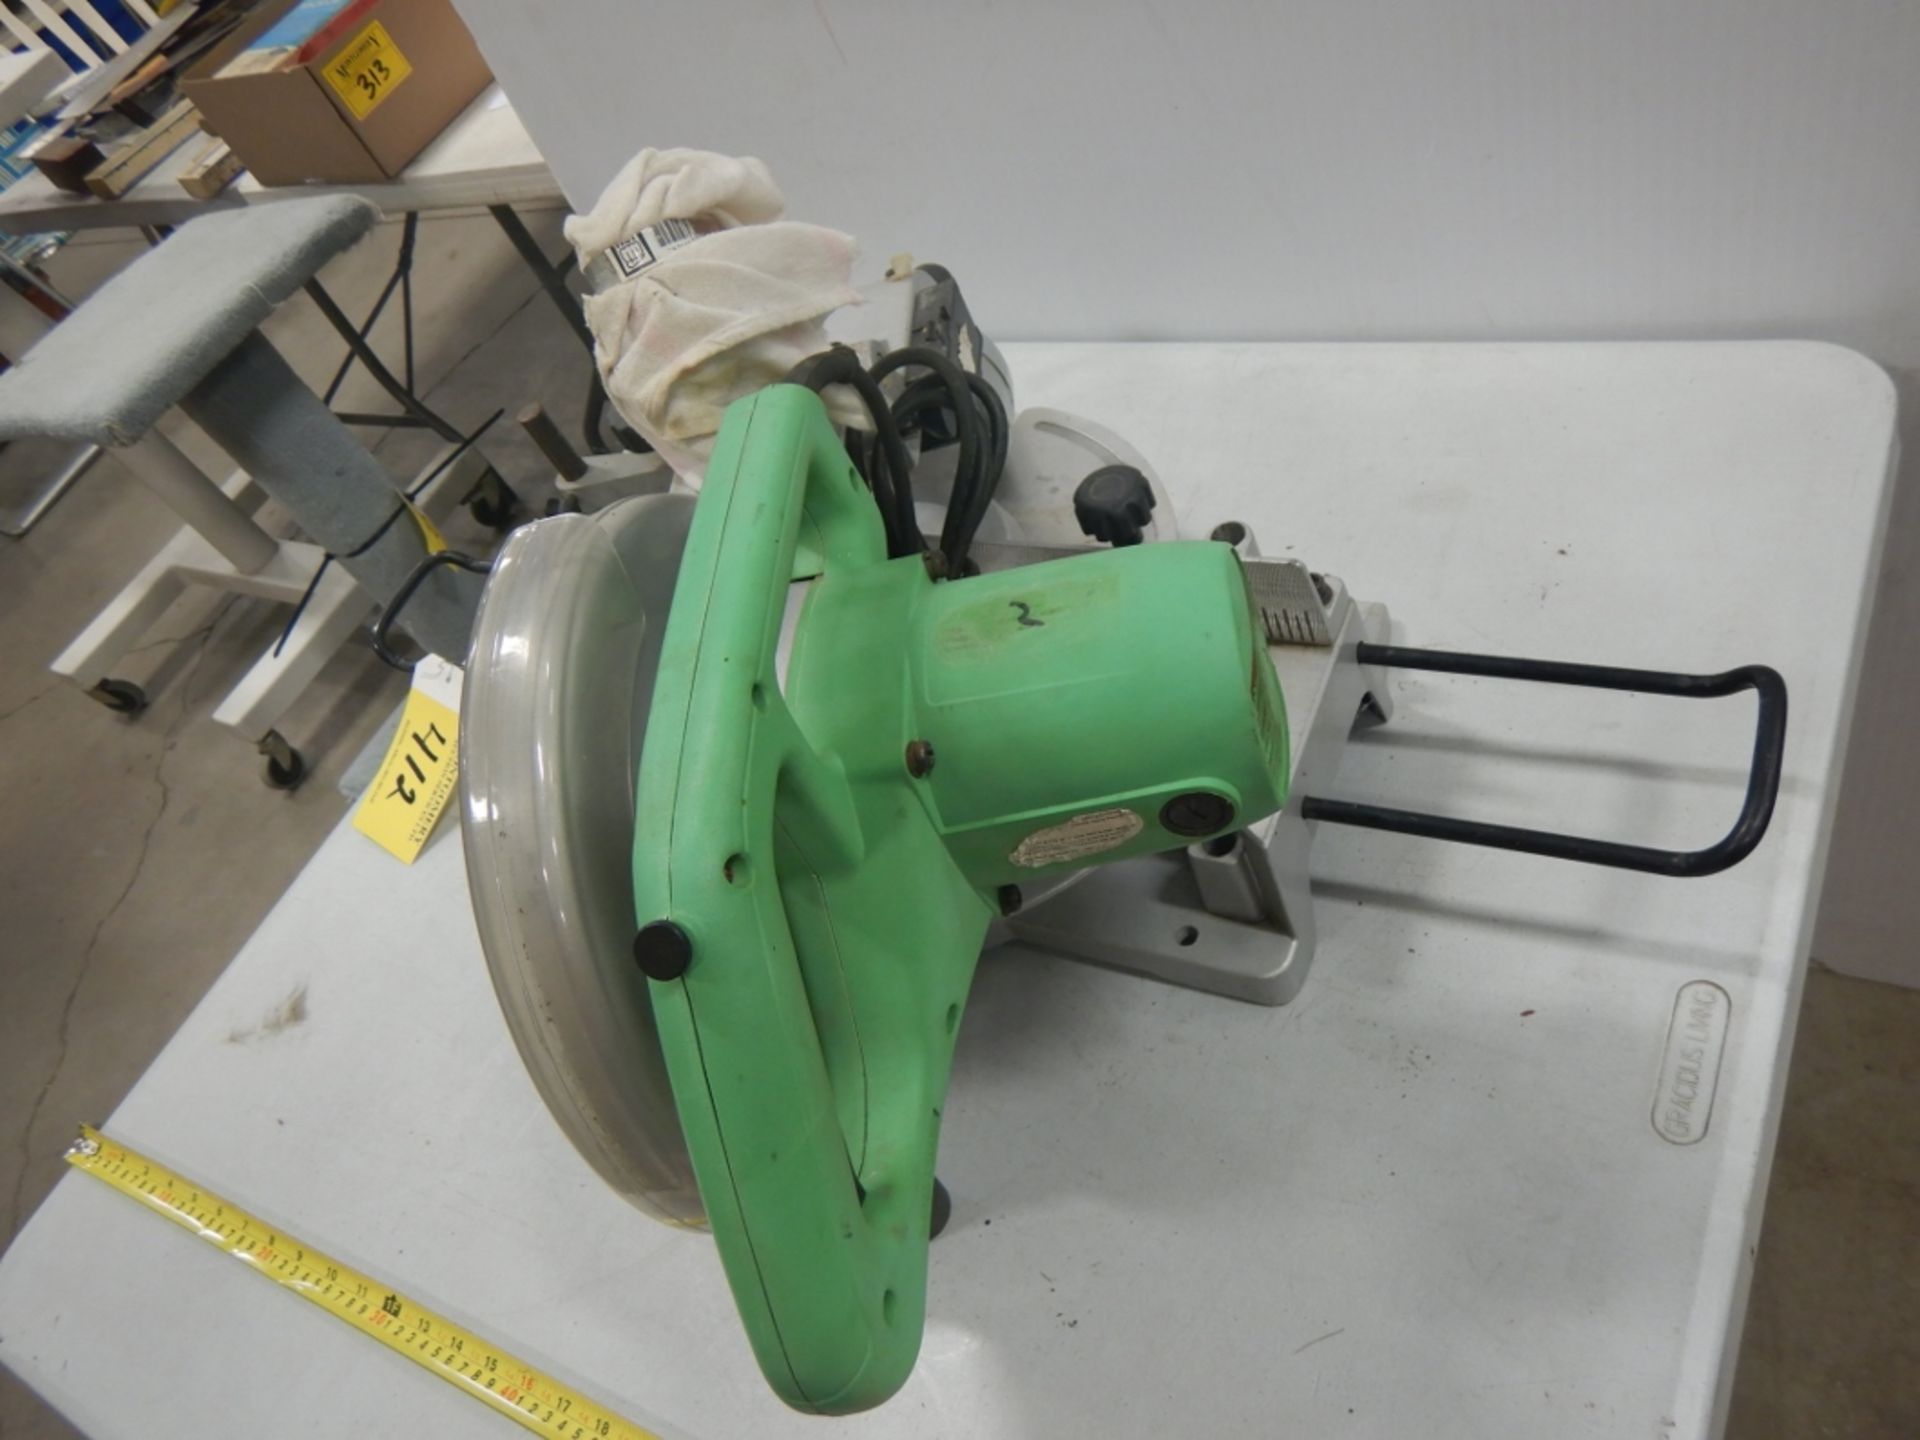 SUPERIOR 10IN COMPOUND MITRE SAW - Image 2 of 2